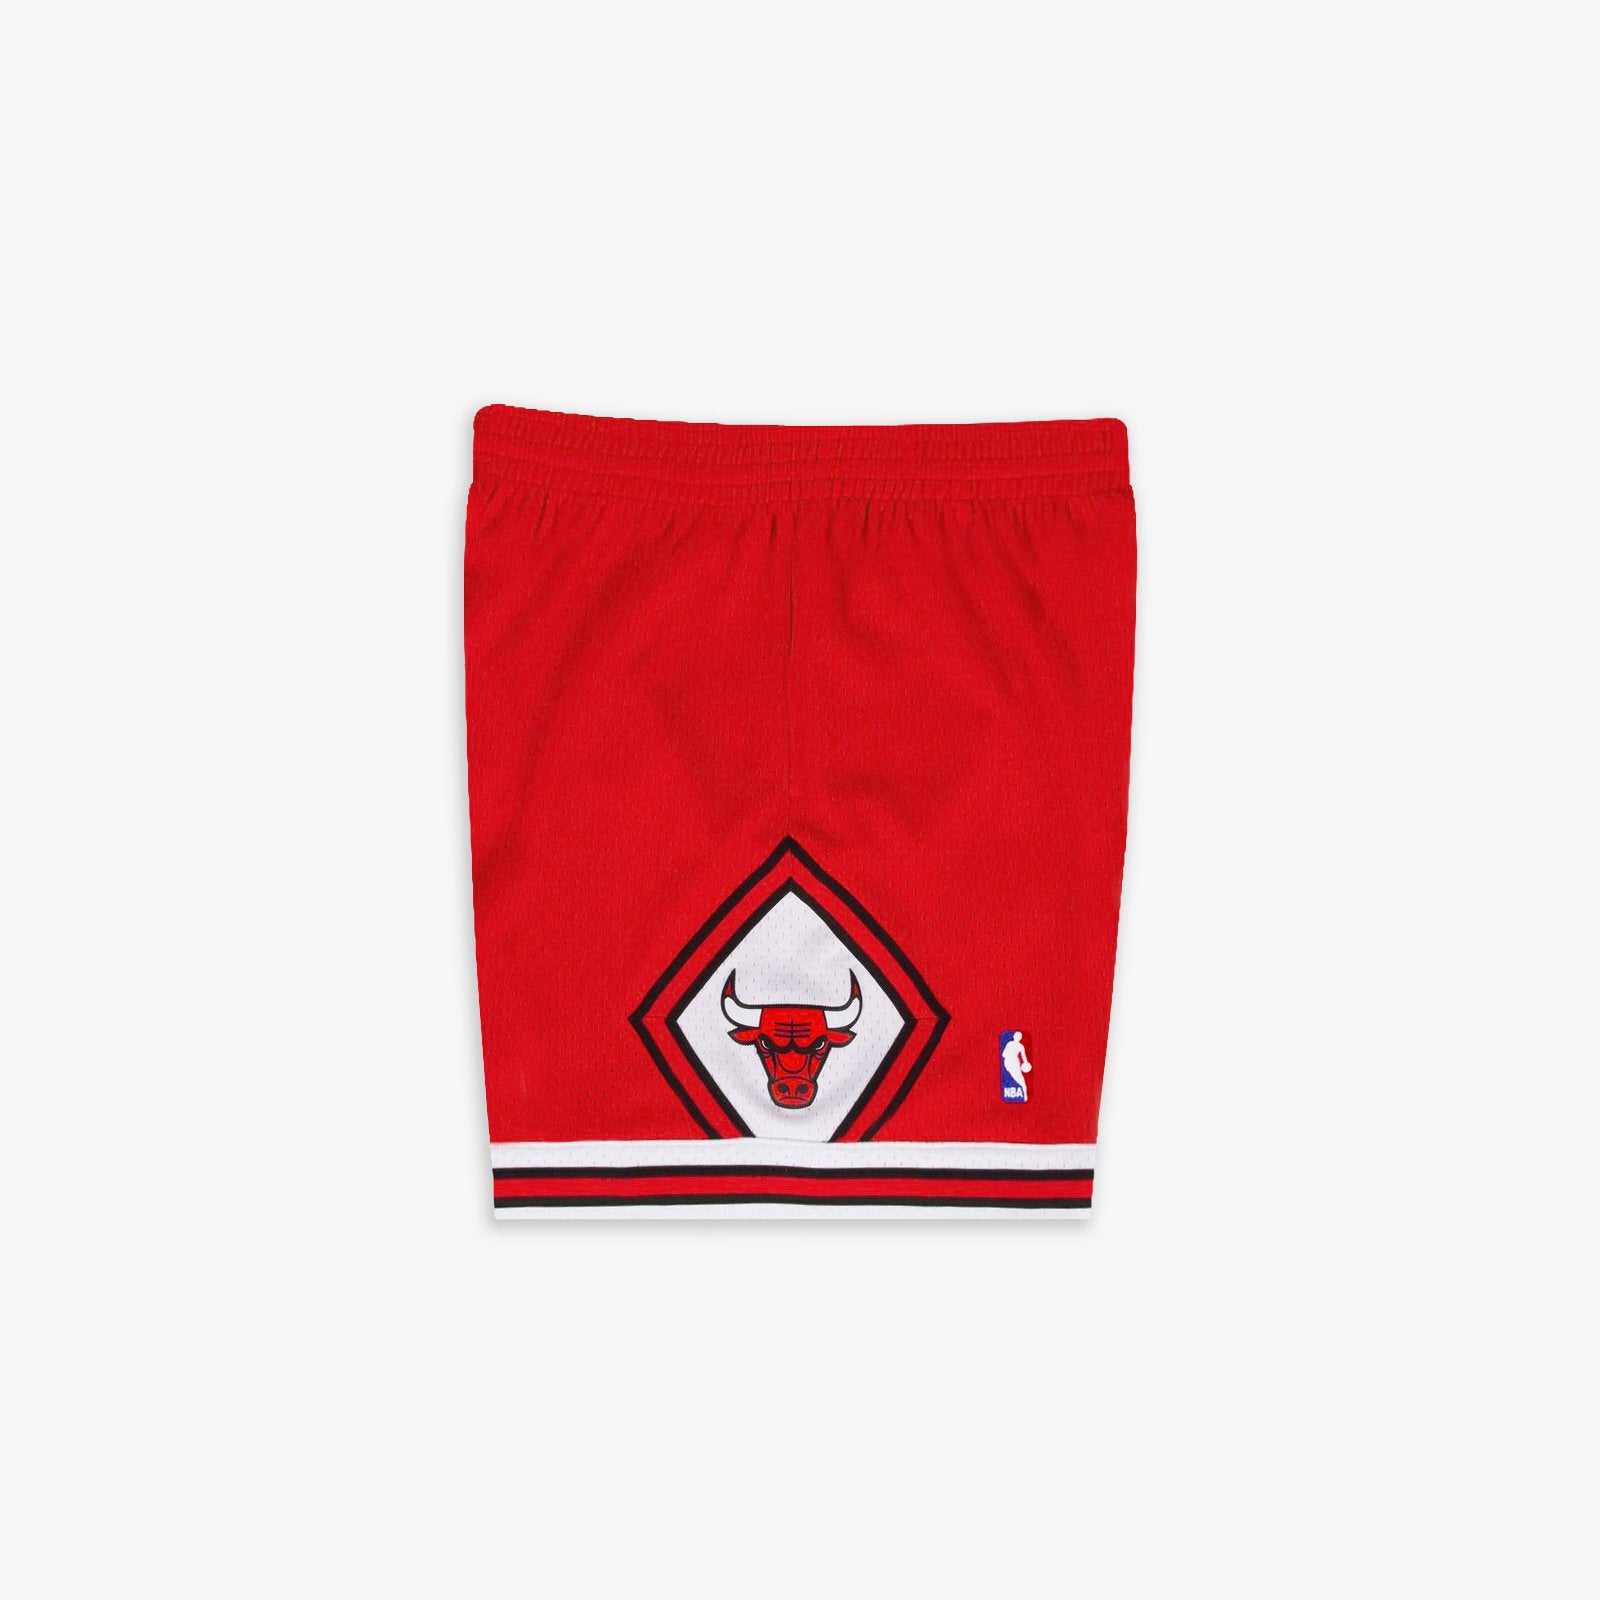 JustOneVintage Chicago Bulls Script Mitchell & Ness HWC 1997 Edition NBA (Sewn/Stitched) Red Pinstripe Re-Take Gradient Swingman Basketball Shorts Gym